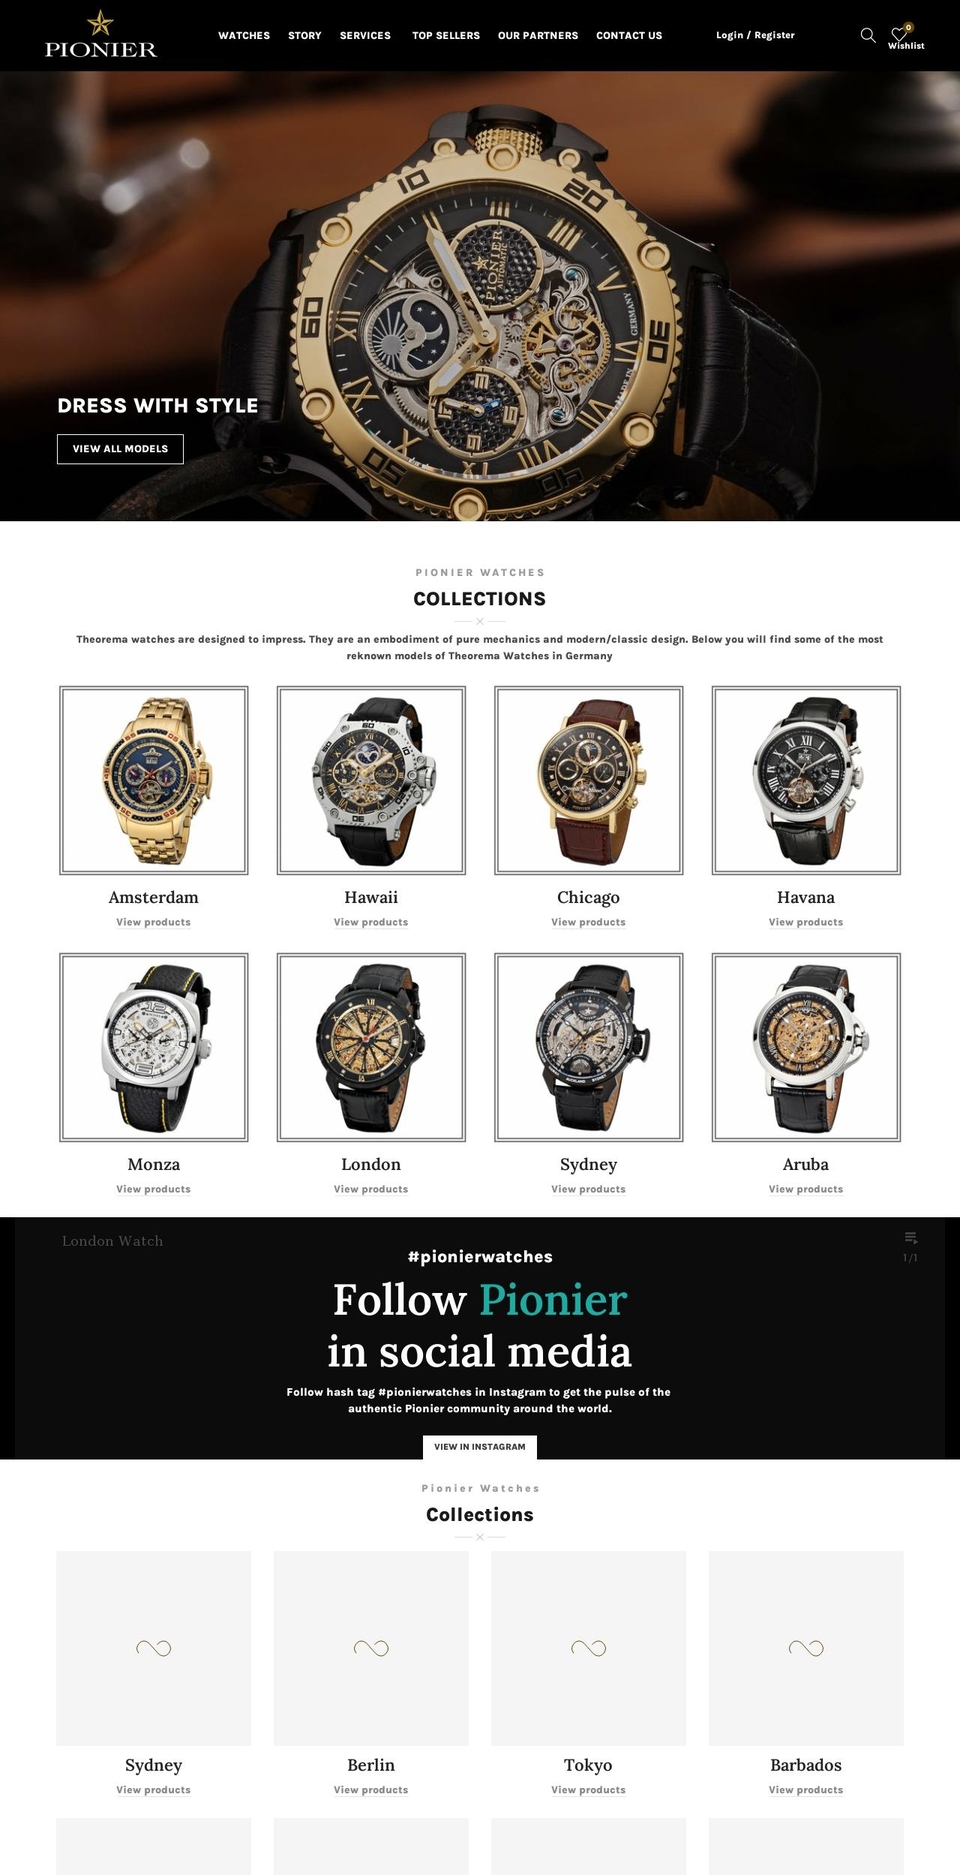 basel Shopify theme site example pionierwatches.com